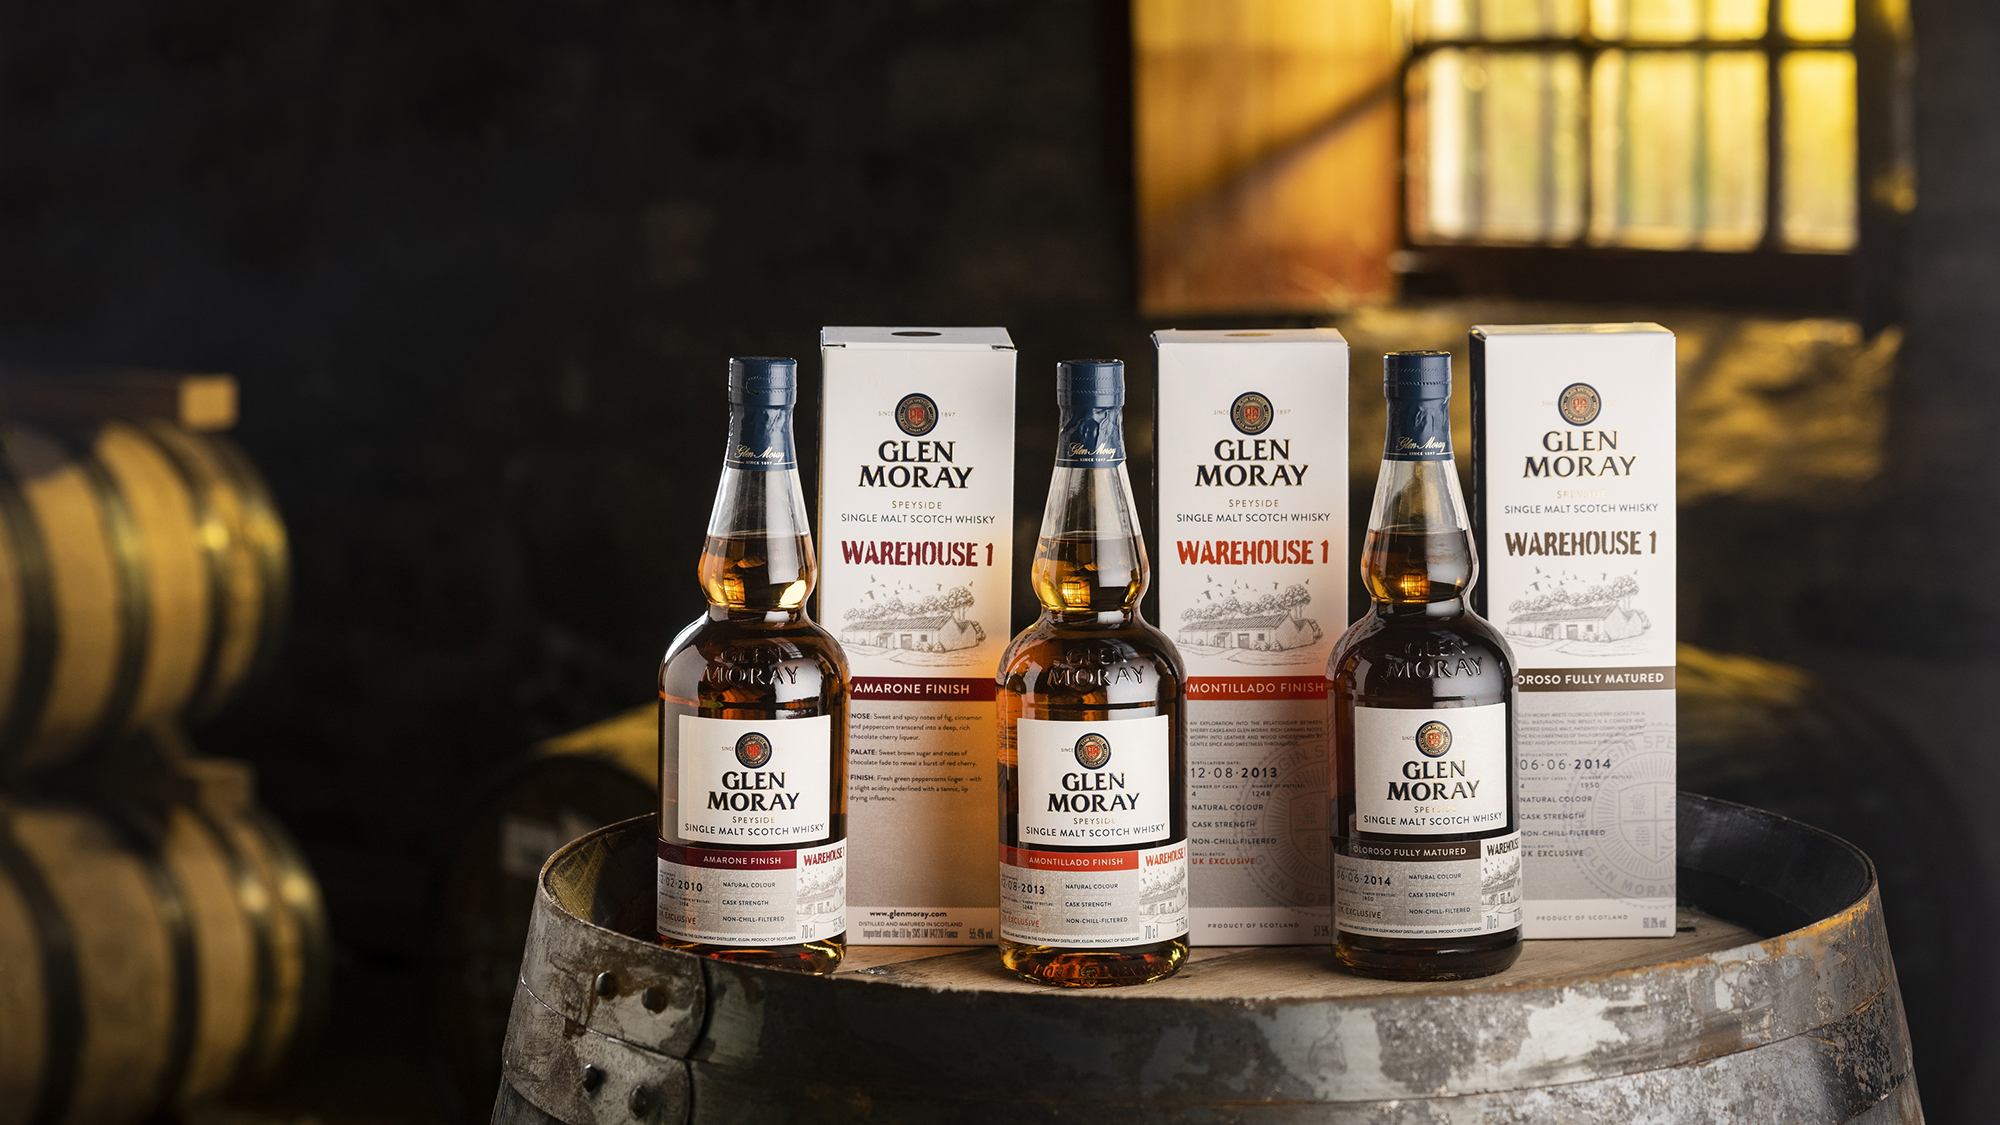 Glen Moray Used Amarone, Amontillado, And Oloroso Casks To Create The Latest Additions To Its Warehouse 1 Collection